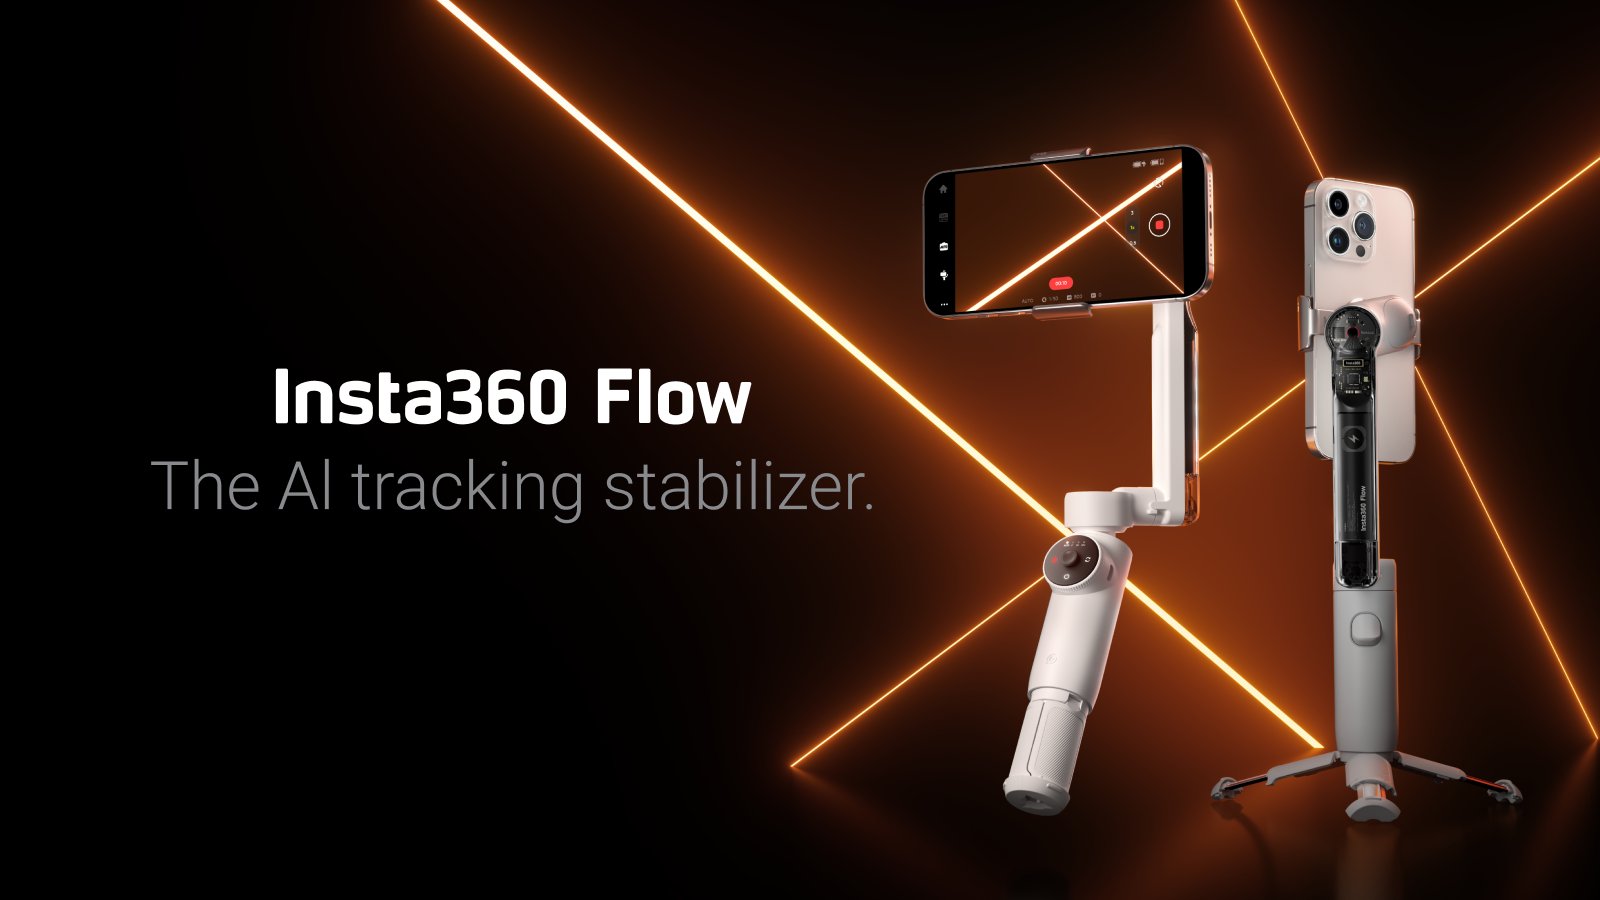 Insta360 on X: Create like a pro with Insta360 Flow, our brand new AI  tracking smartphone stabilizer. With next-generation subject tracking,  professional-level stabilization and a built-in tripod AND selfie stick,  Flow is